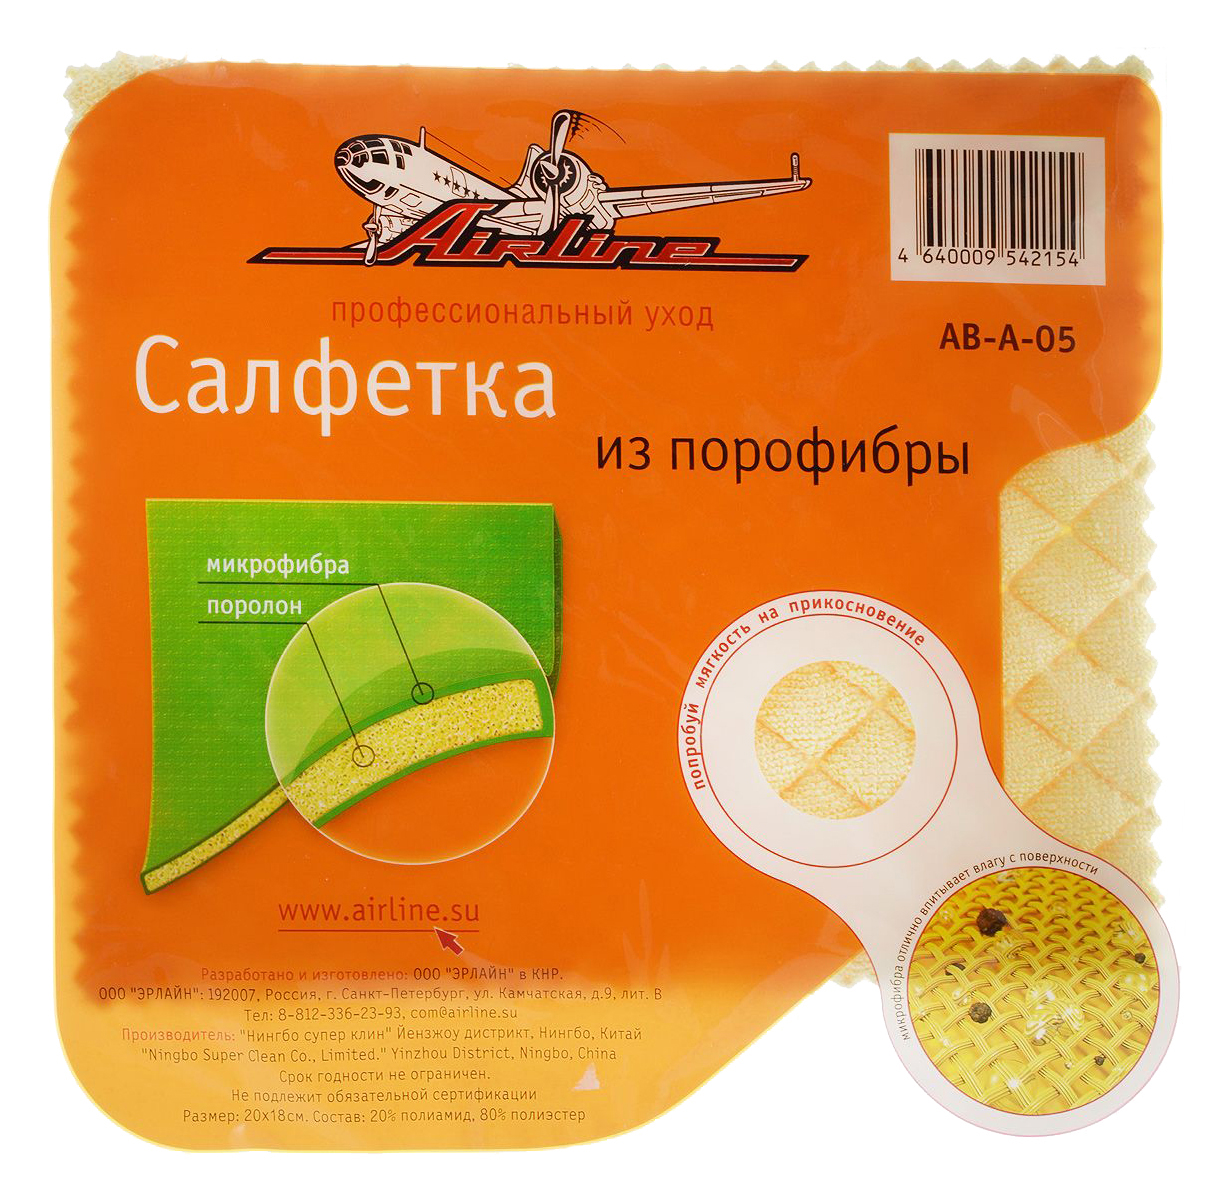 Салфетка Airline 50г 50г AB-A-05